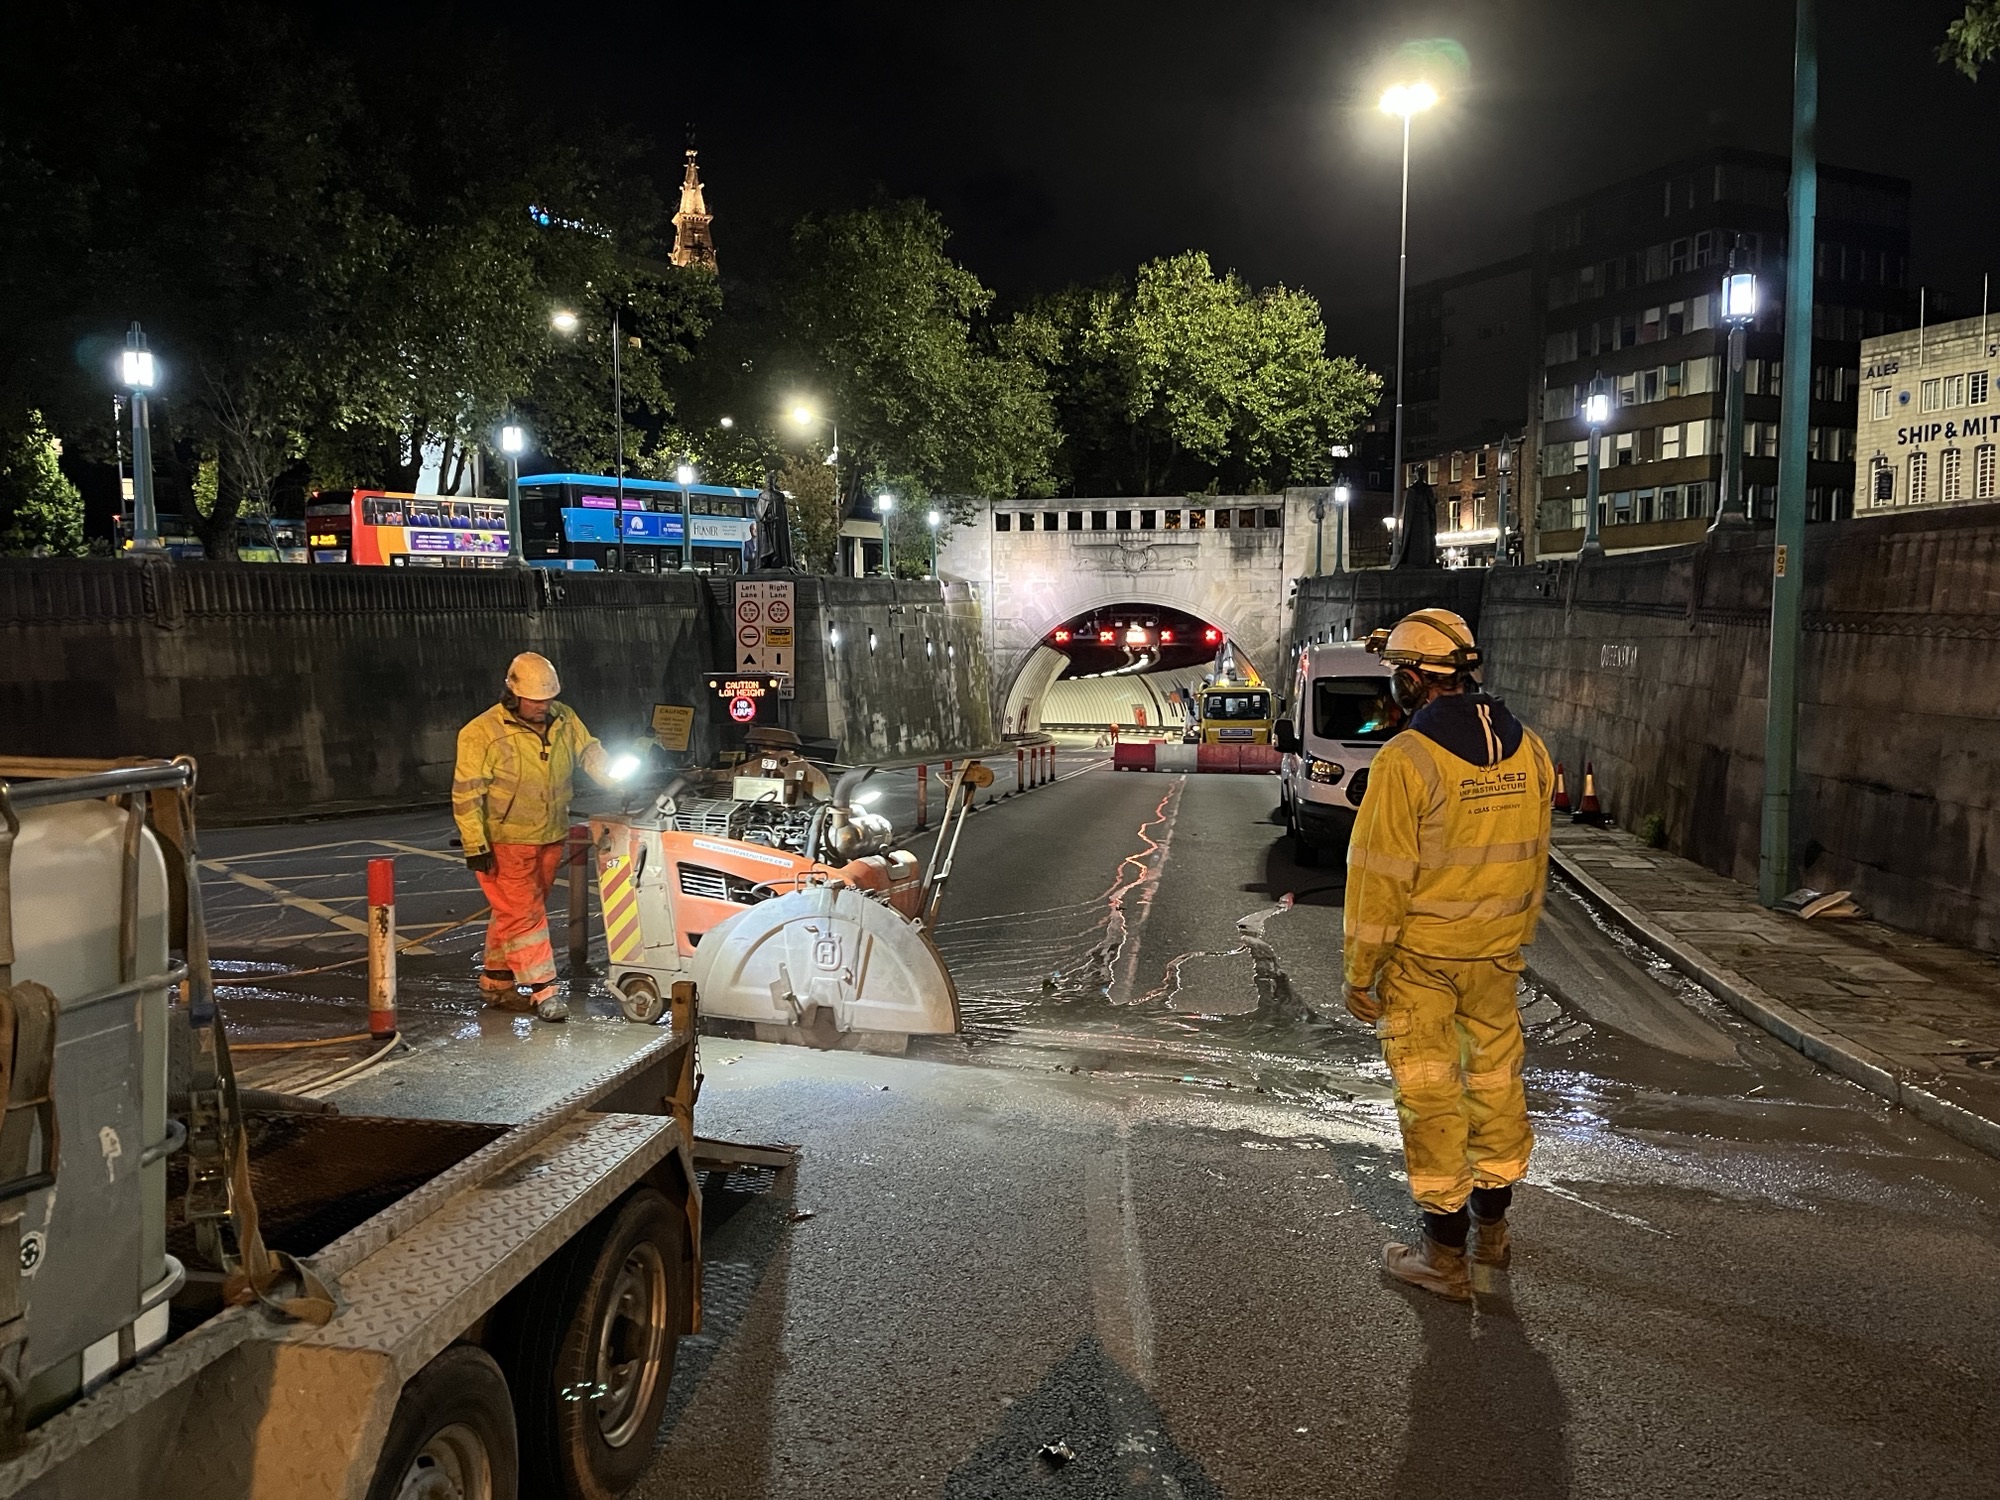 New images reveal scale of work as part of £11m Queensway tunnel upgrade